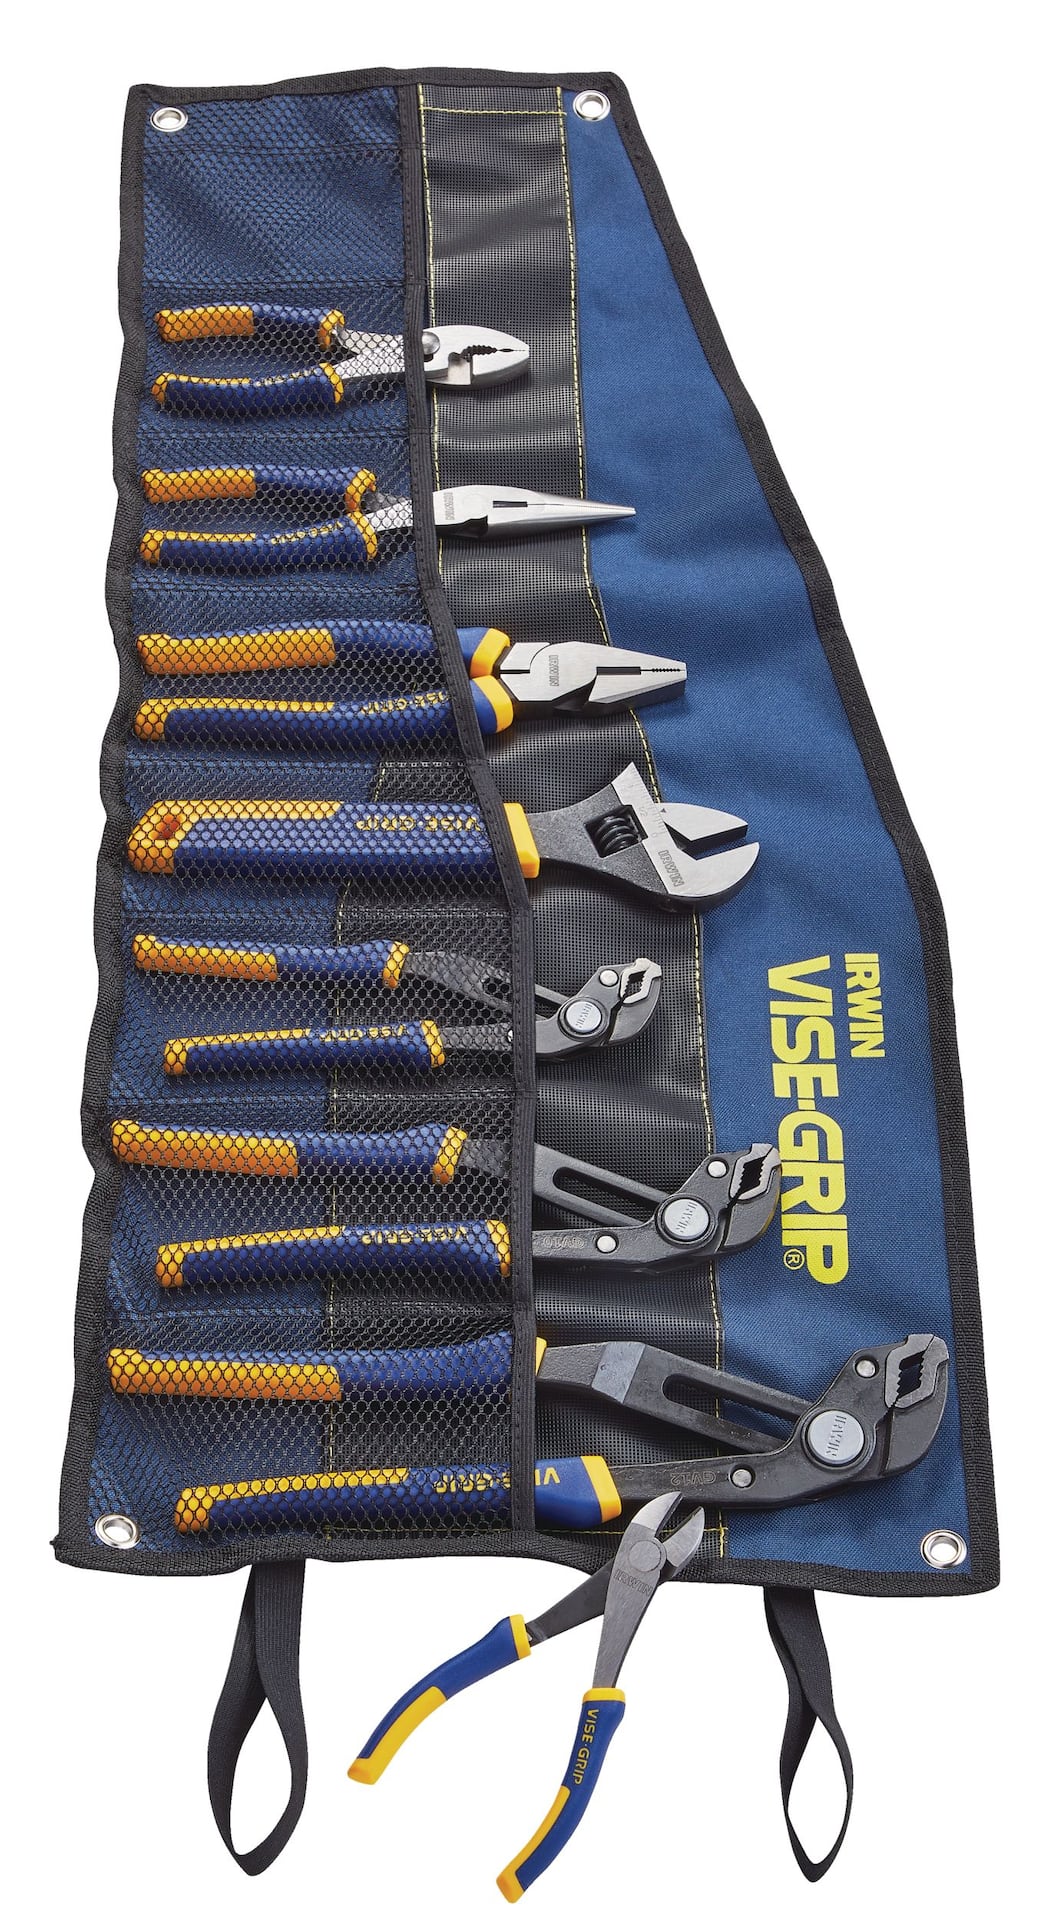 IRWIN 2078712 Vise-Grip GrooveLock Pliers Set with Storage Roll